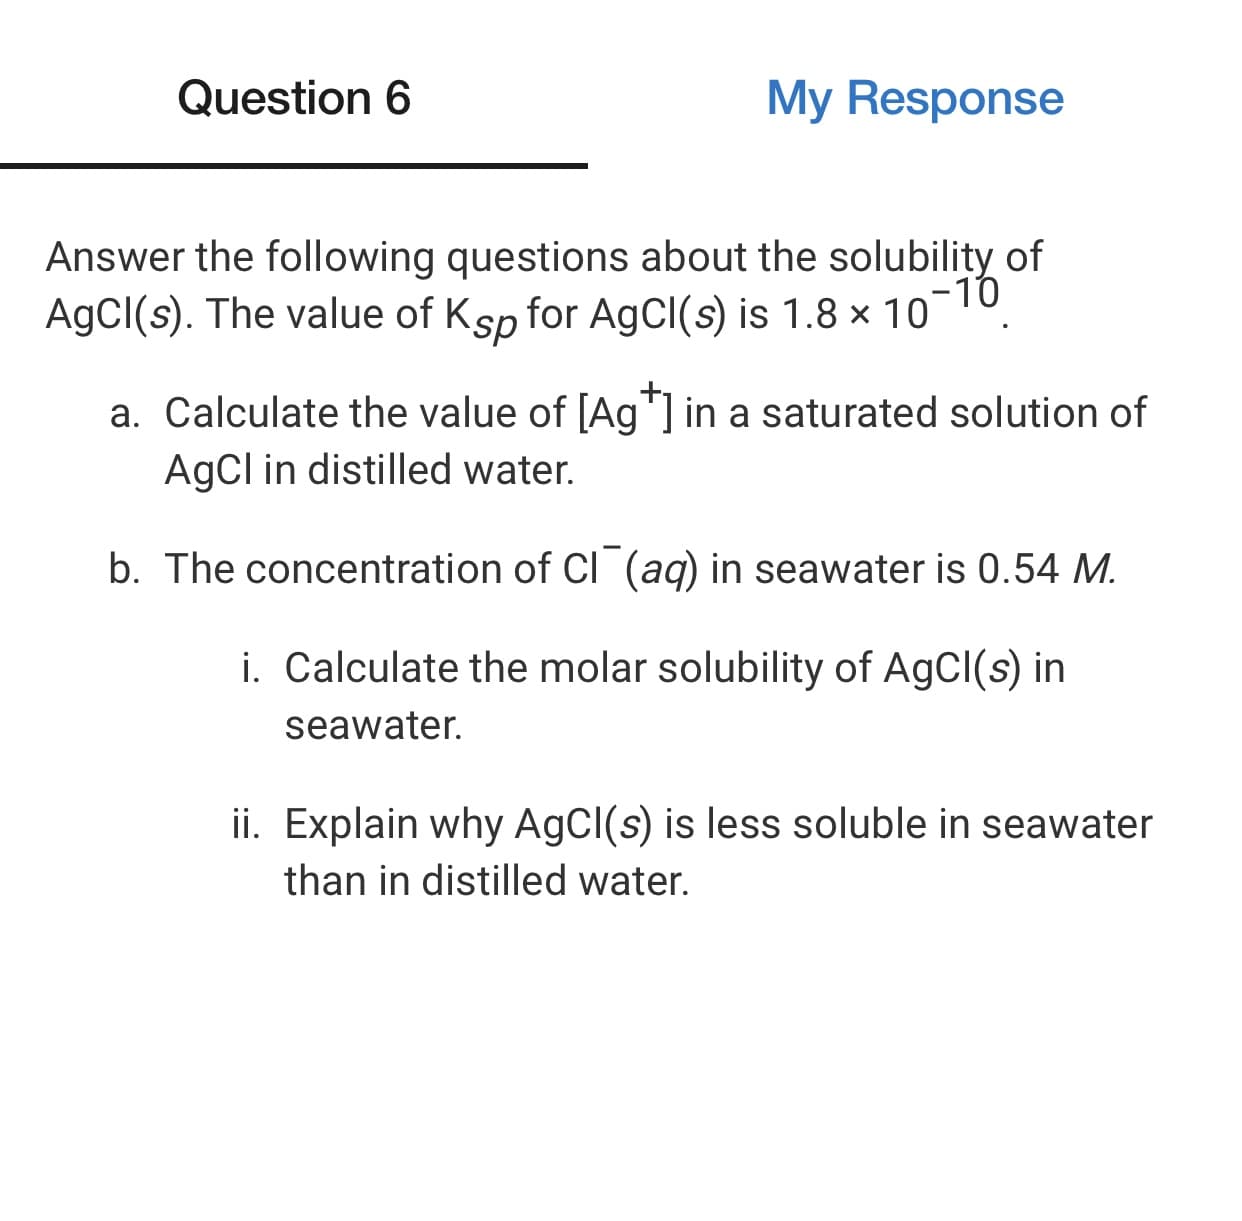 Answer the following questions about the solubility of
-10
AgCI(s). The value of Ksp for AgCl(s) is 1.8 × 10
a. Calculate the value of [Ag"] in a saturated solution of
AgCl in distilled water.
b. The concentration of CI (aq) in seawater is 0.54 M.
